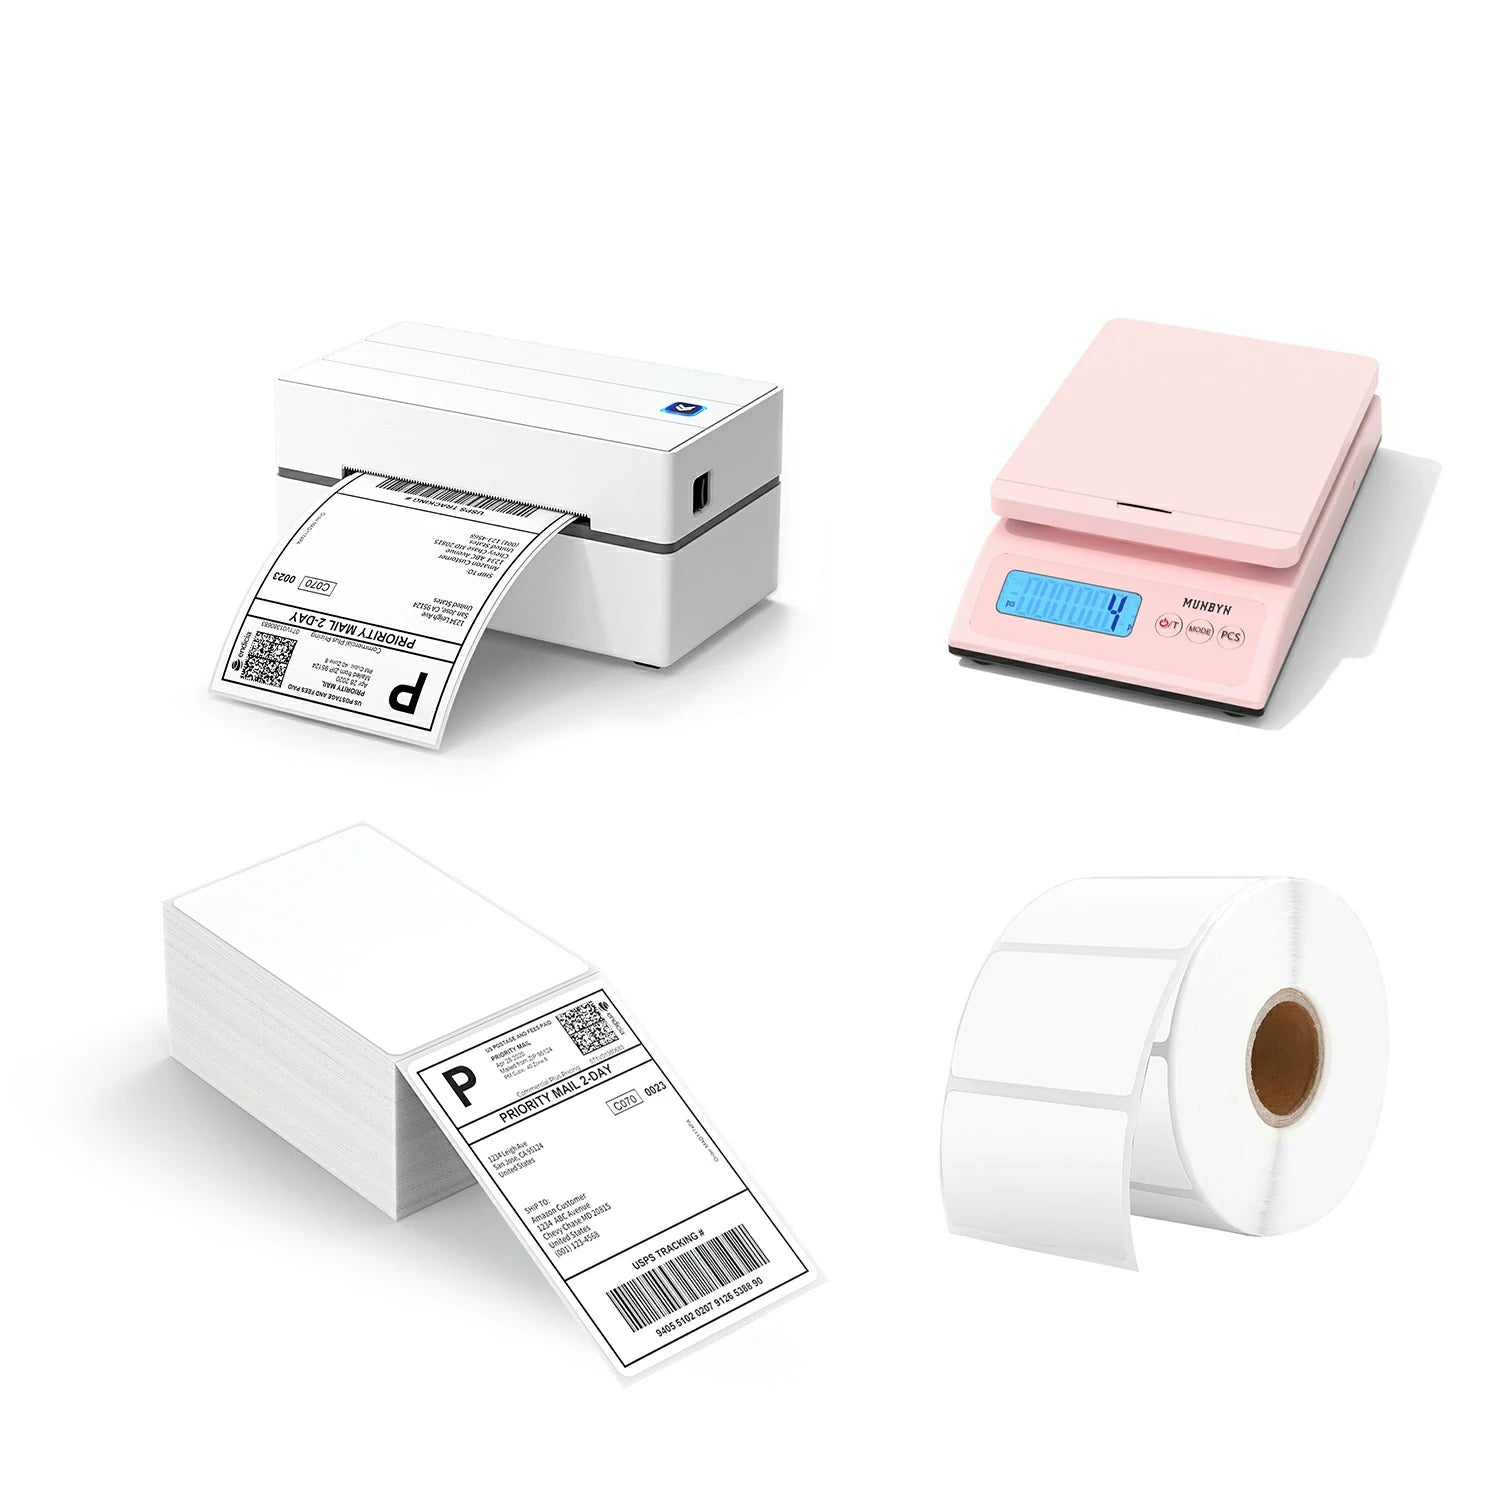 The MUNBYN 130 thermal printer kit includes a USB thermal label printer, a stack of shipping labels, a roll of rectangle labels, and a pink digital postal scale.